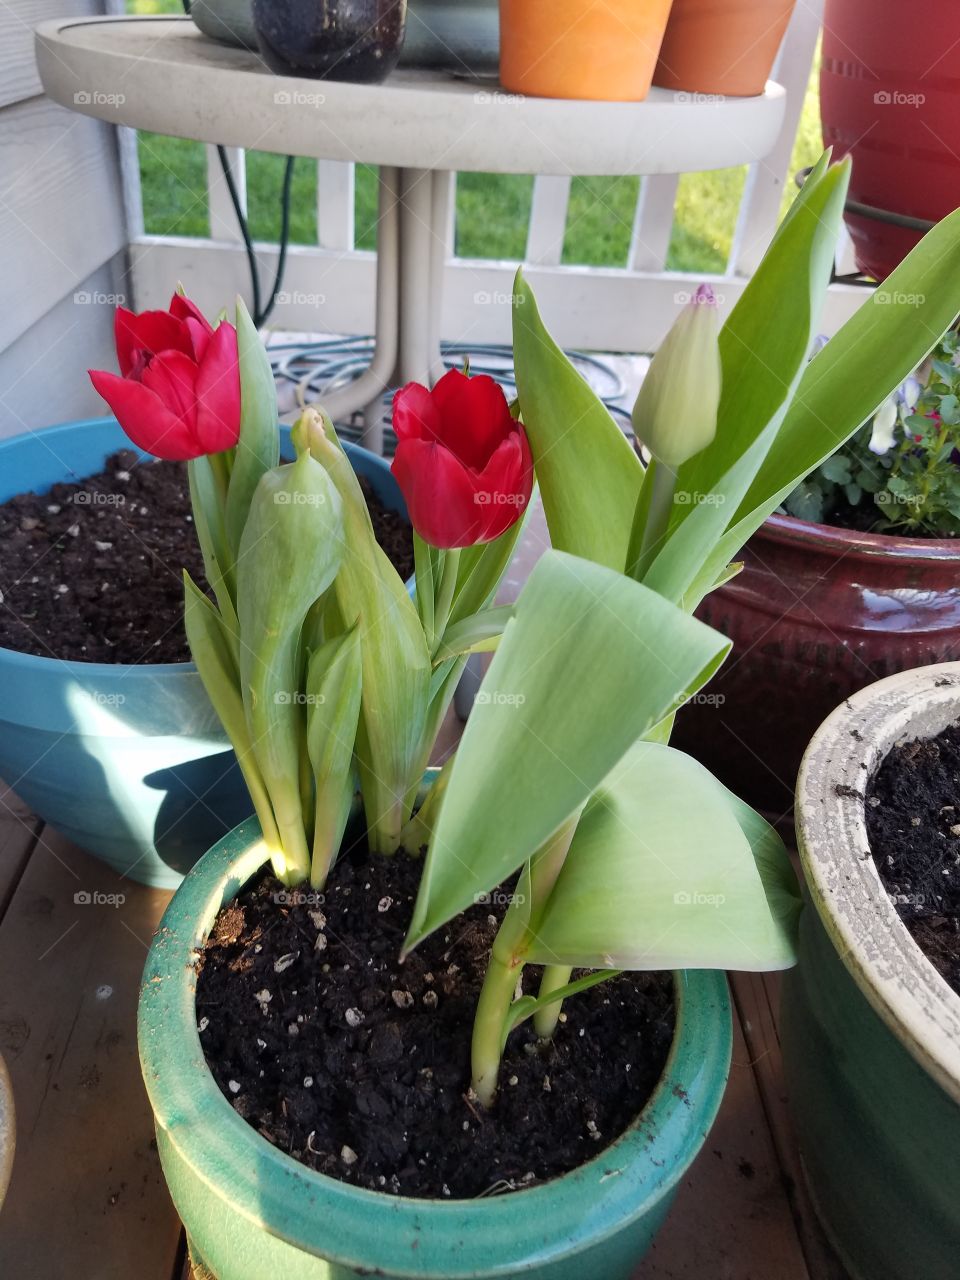 Blooming tulips for spring.